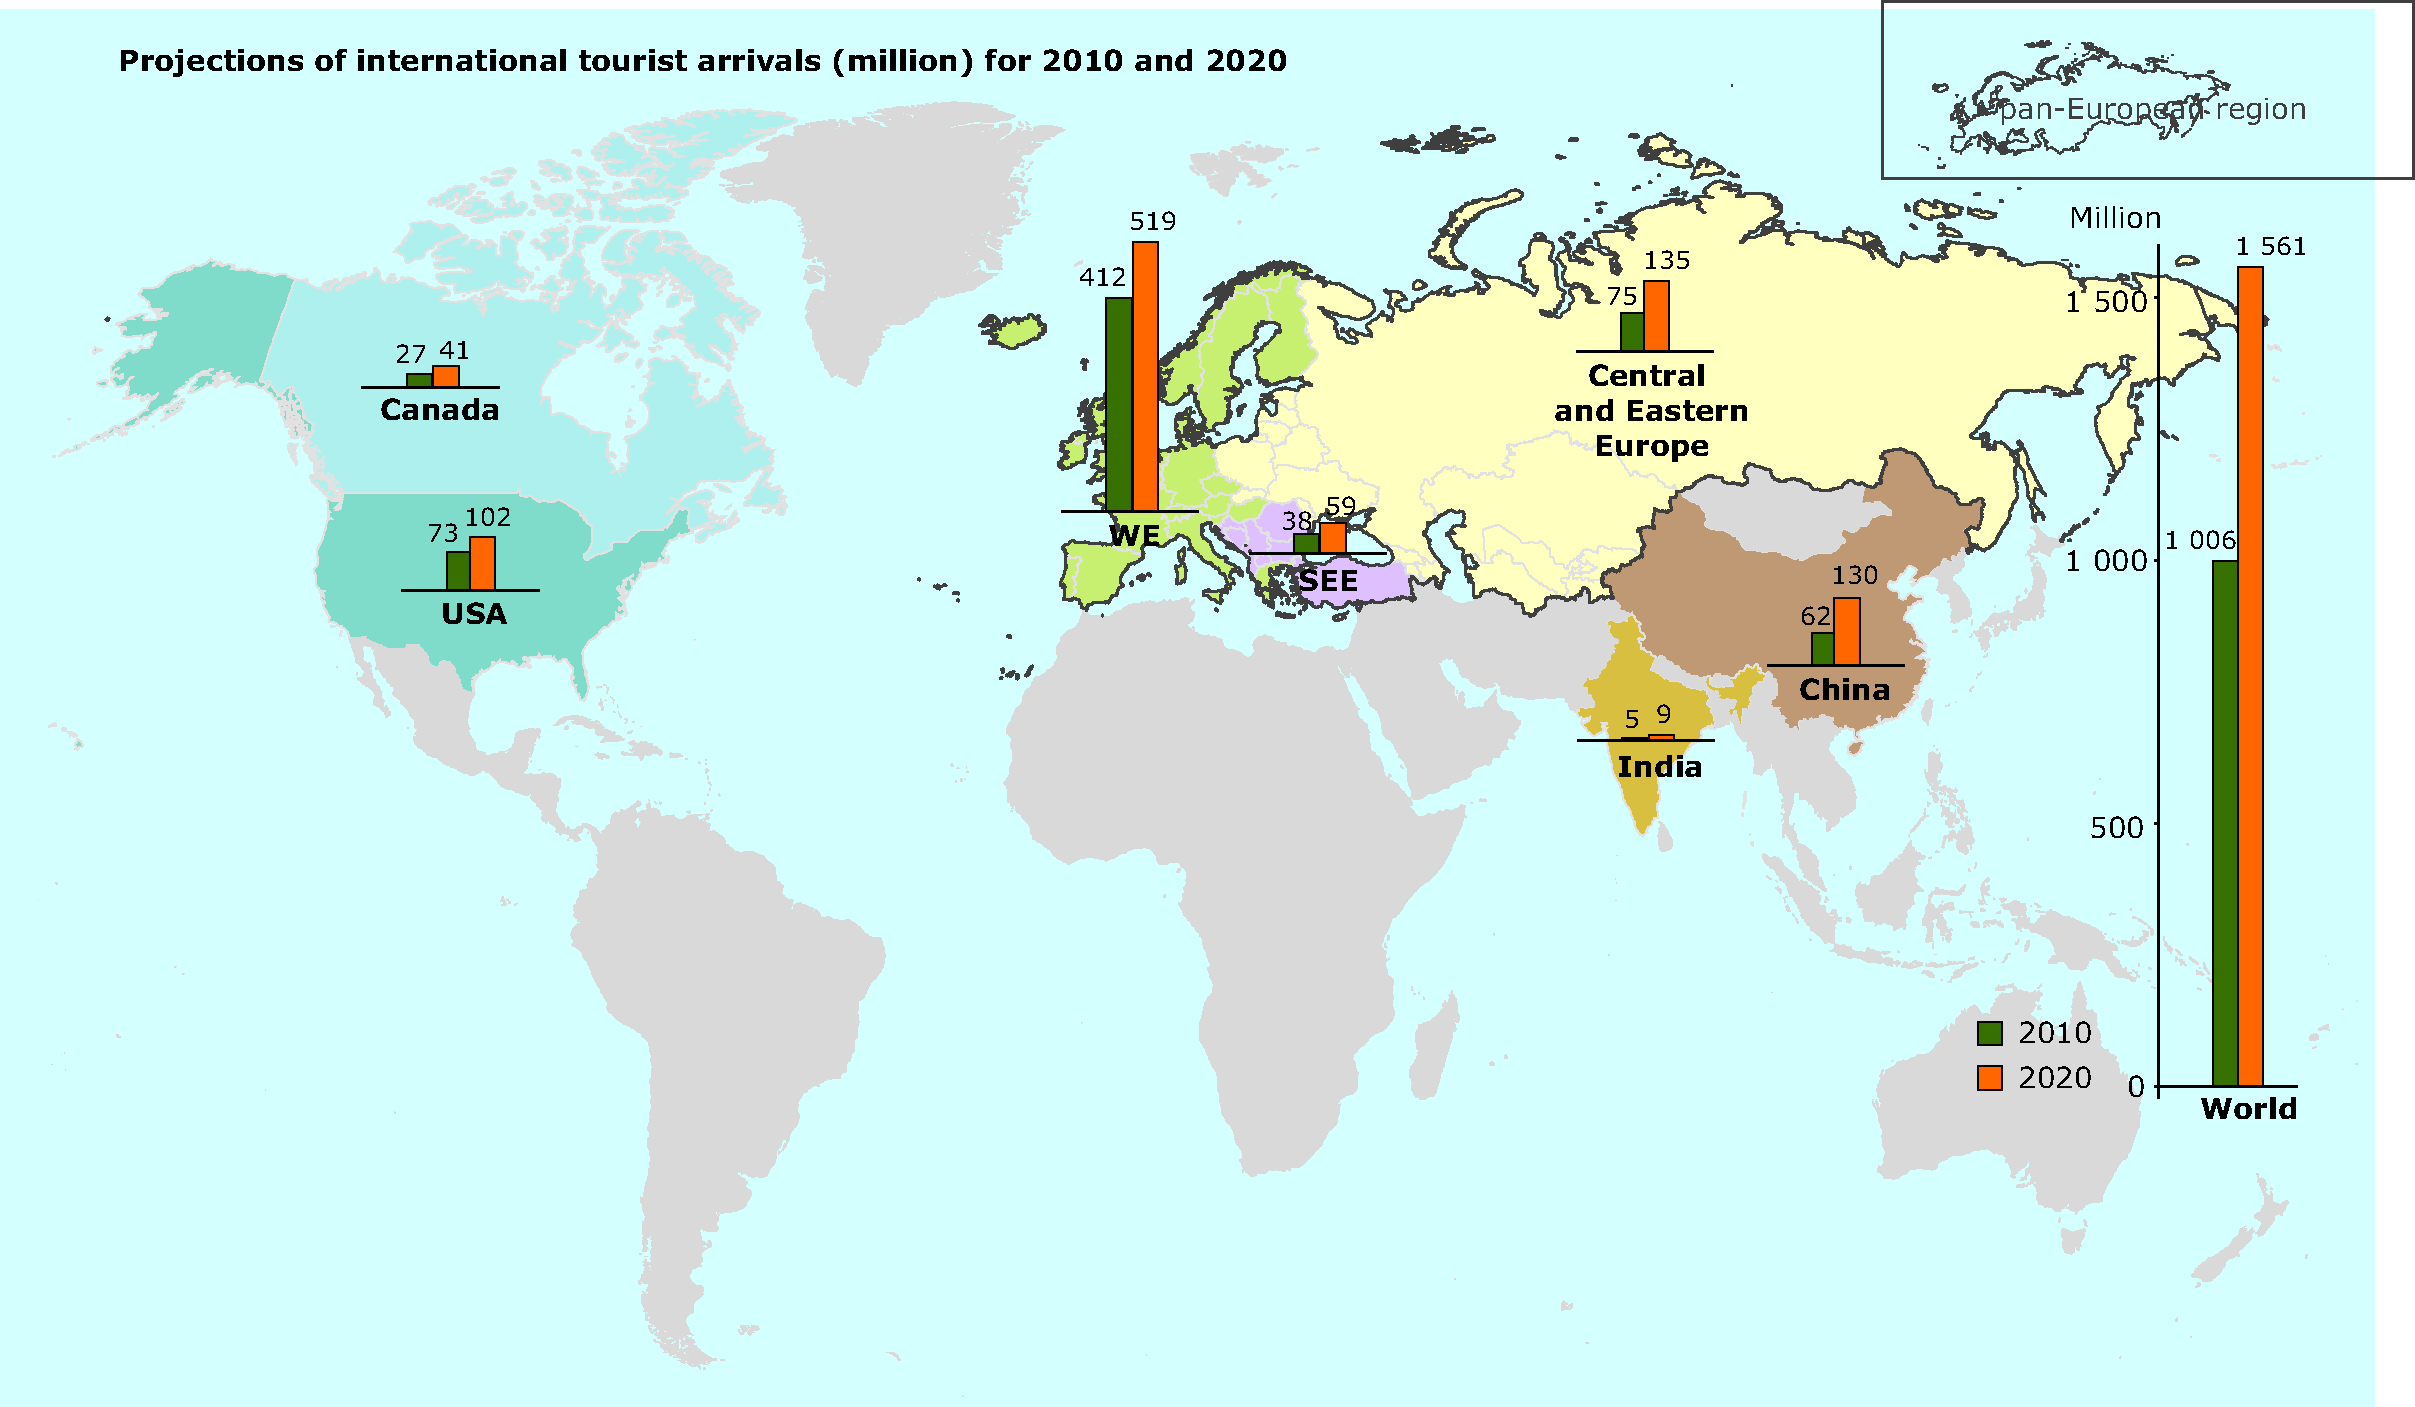 Projections of international tourist arrivals (million) for 2010 and 2020